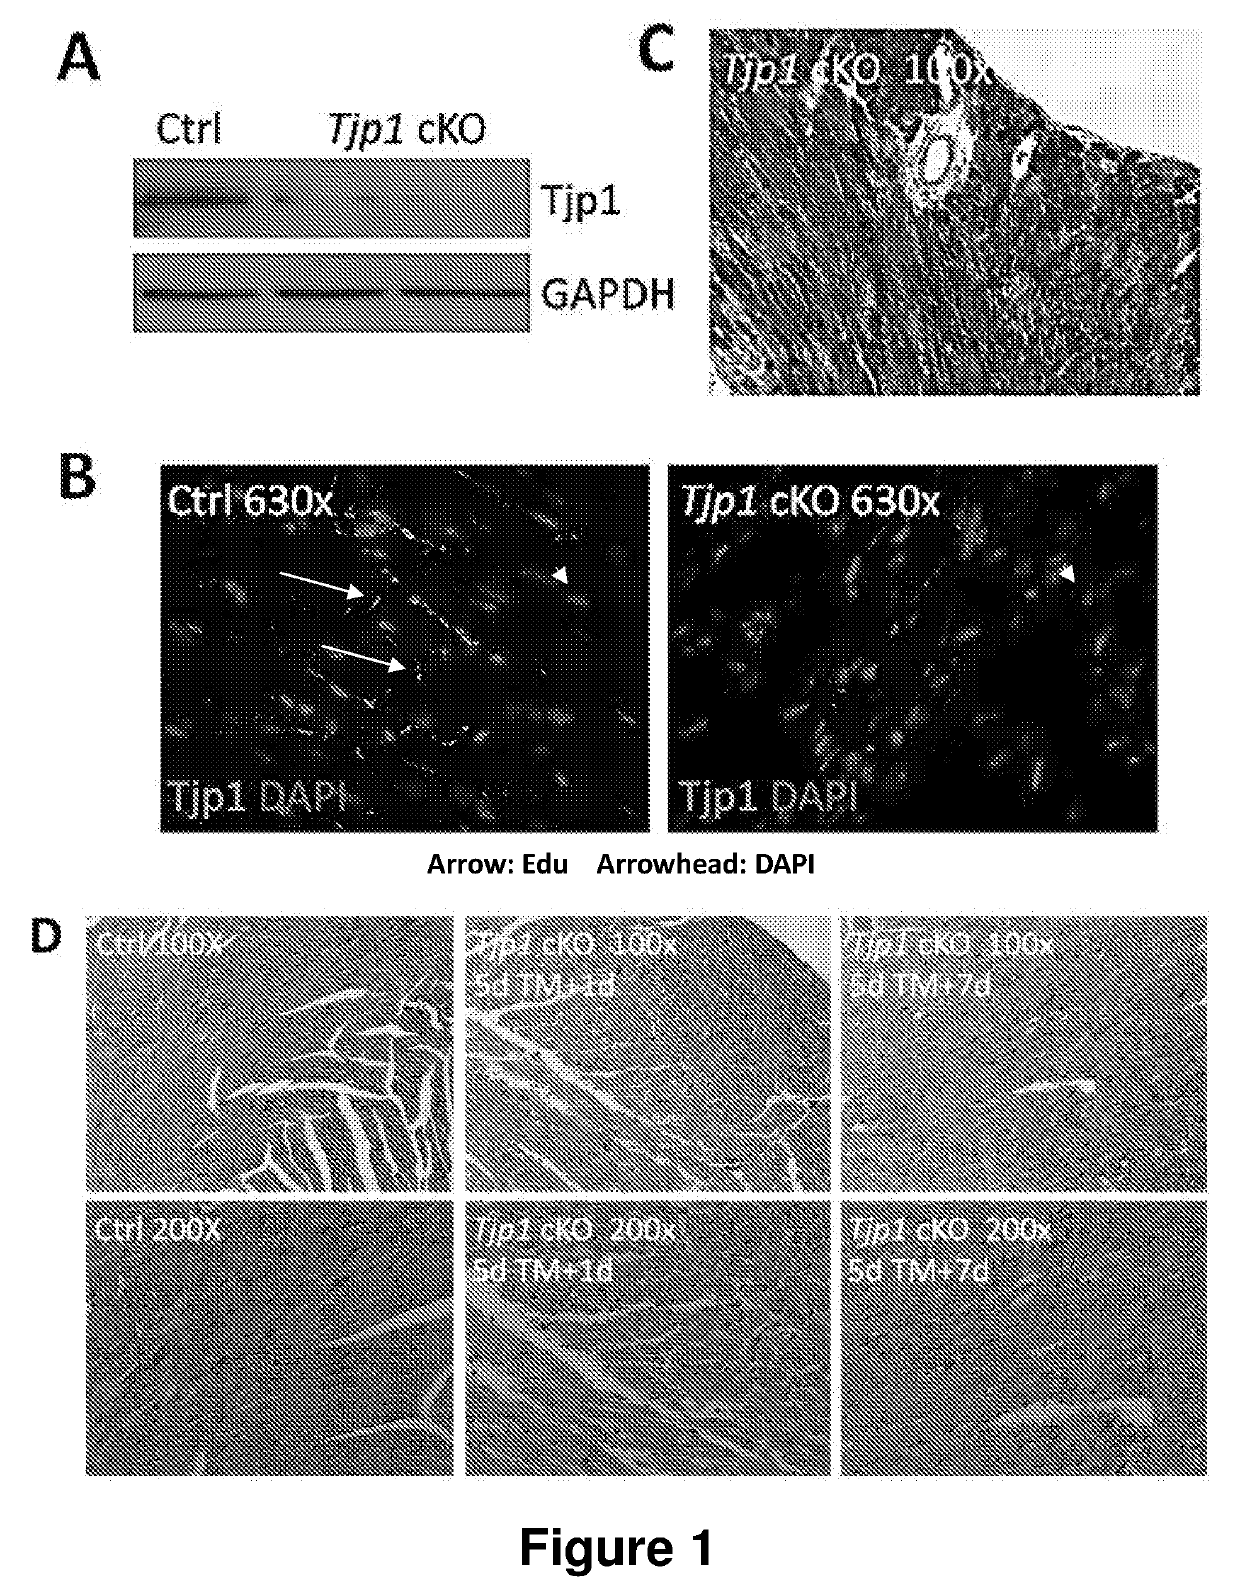 Modulation of tjp1 expression to regulate regeneration of heart cells